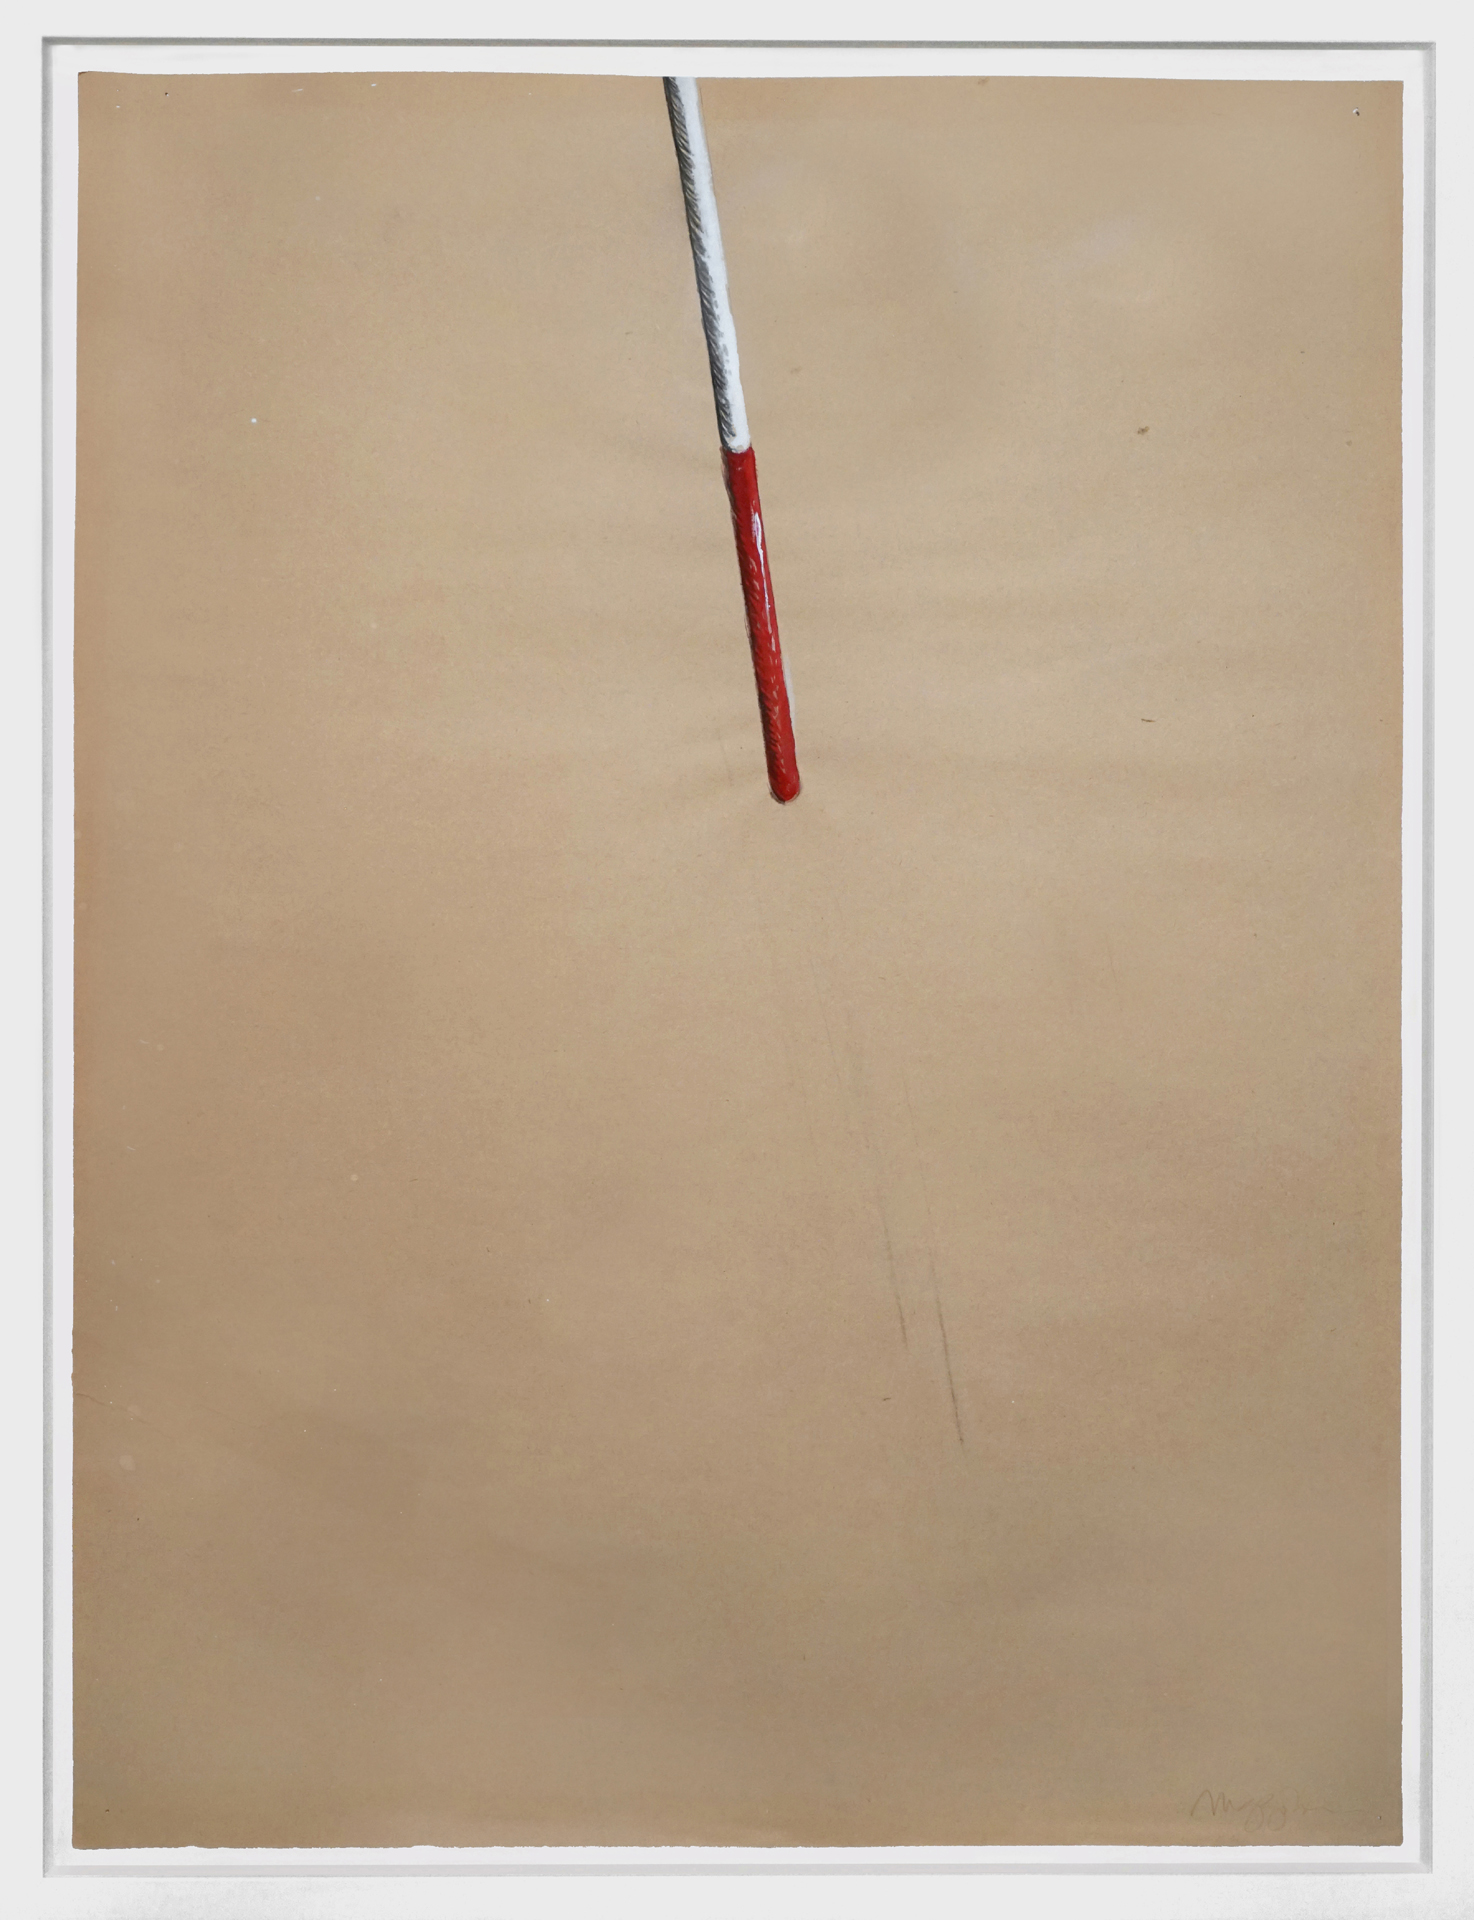 Untitled, (blind cane series), 1996